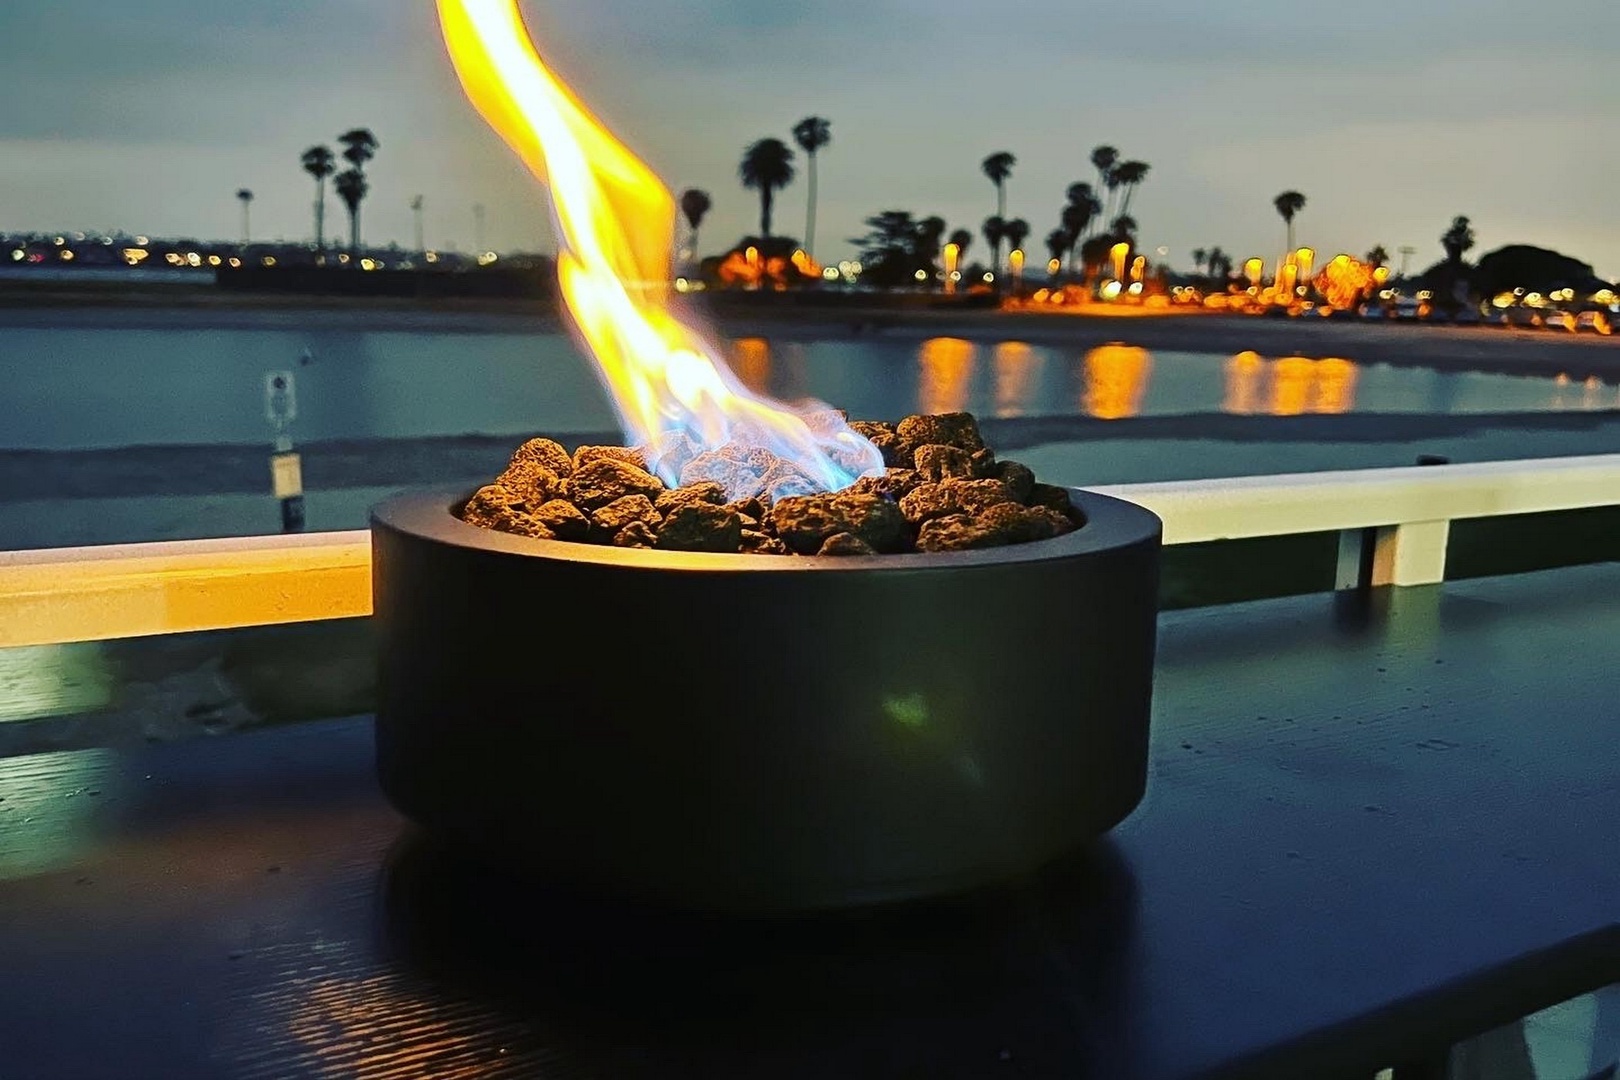 Cozy bartop fire pits and evening views